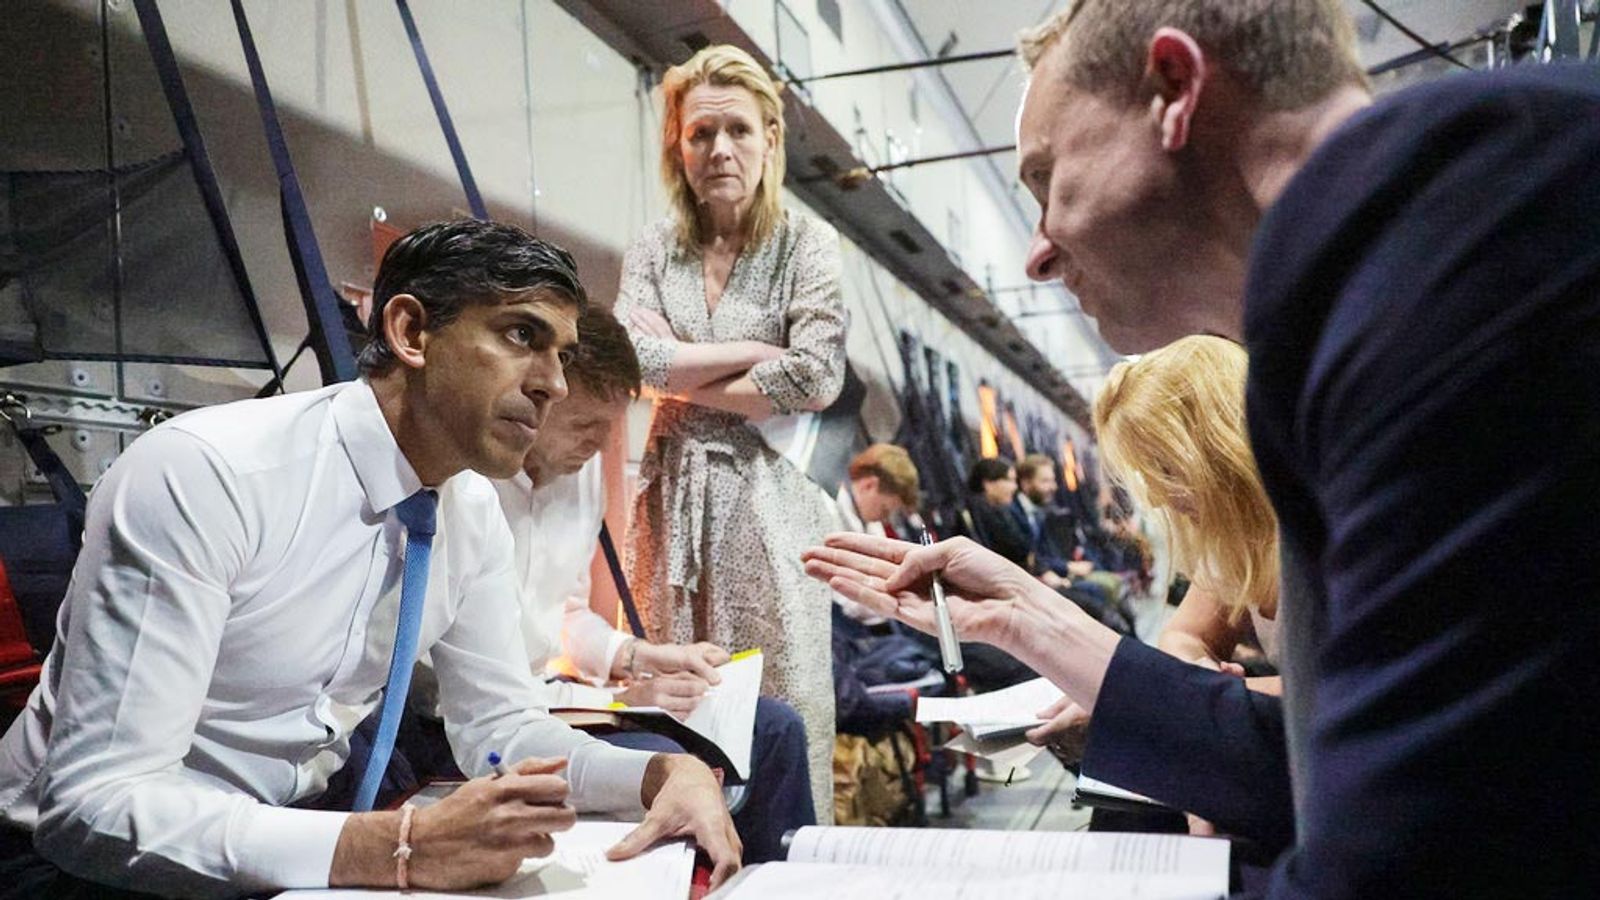 Rishi Sunak puts by-election disasters down to mid-term blues and 'local factors'